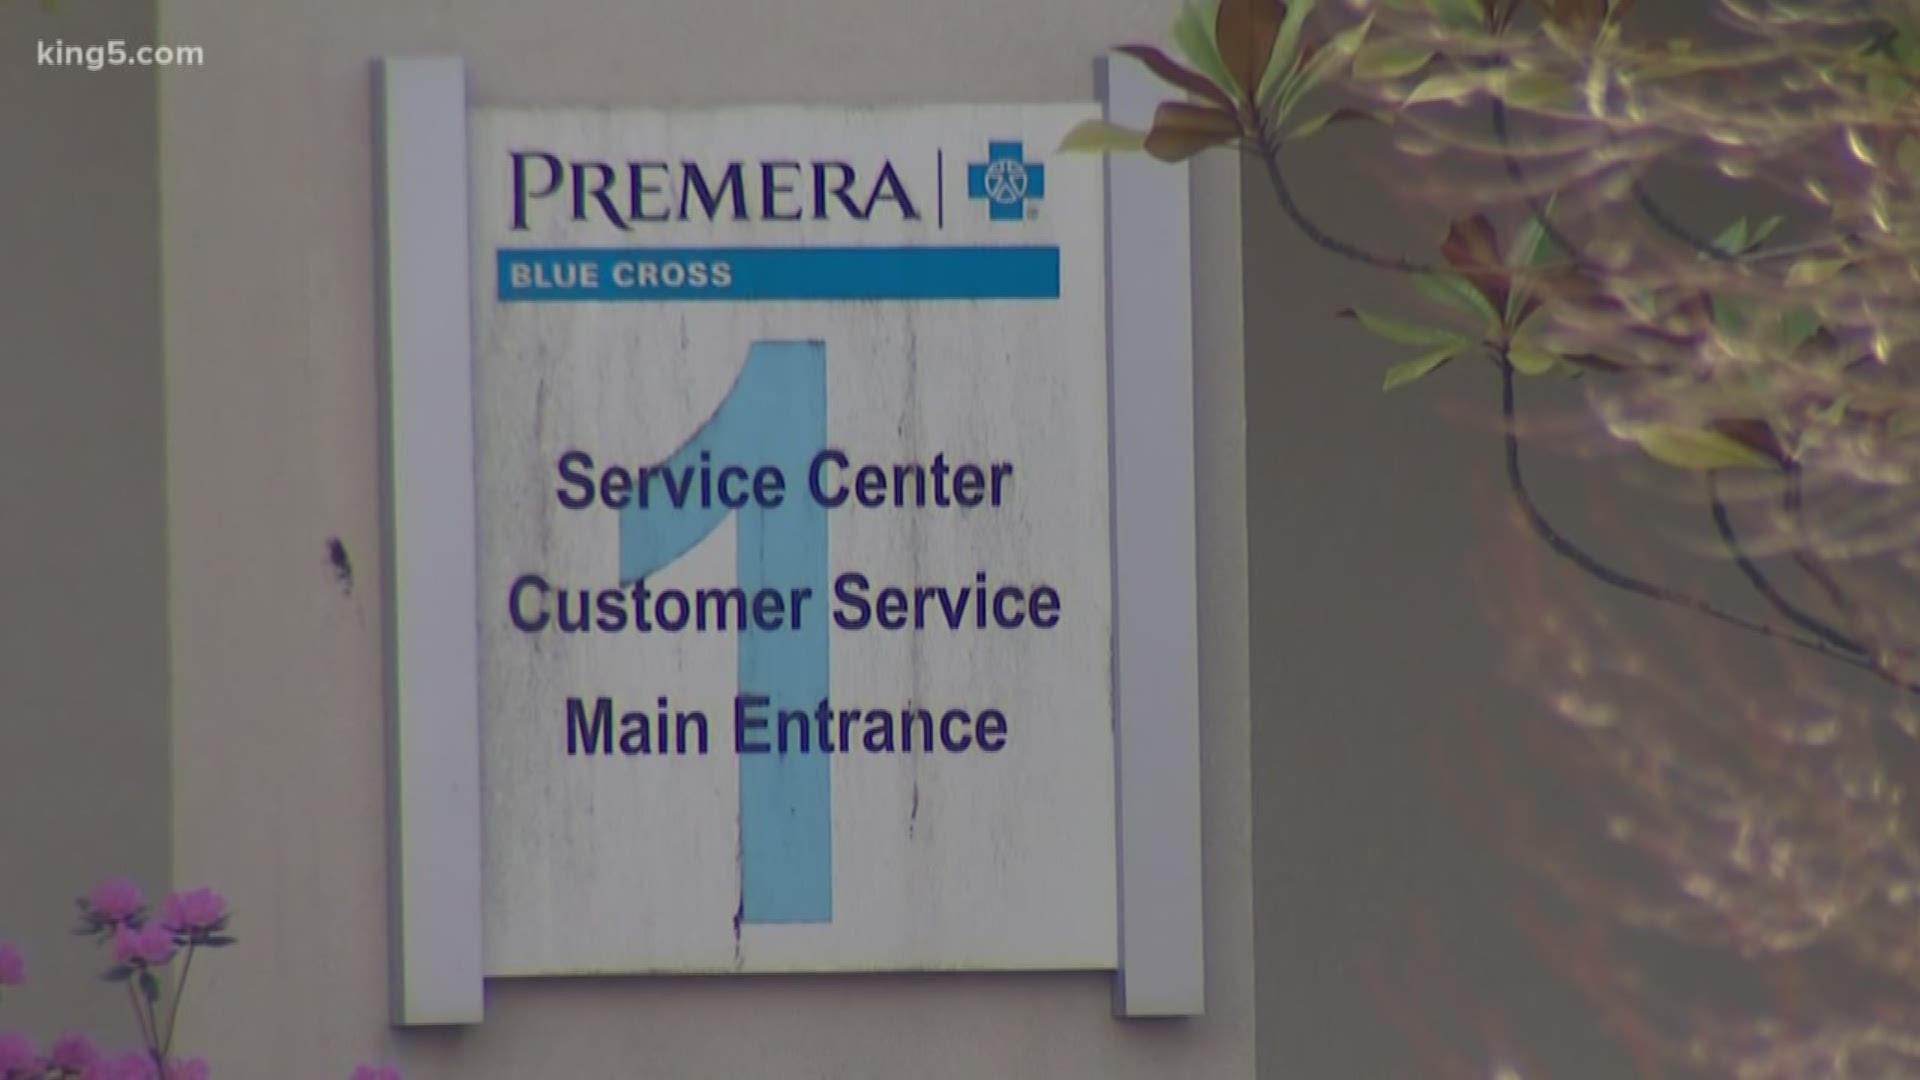 Premera Blue Cross, the Pacific Northwest’s largest health insurance provider, is paying a $10 million fine to 30 states after getting hacked, putting the personal information of millions at risk.